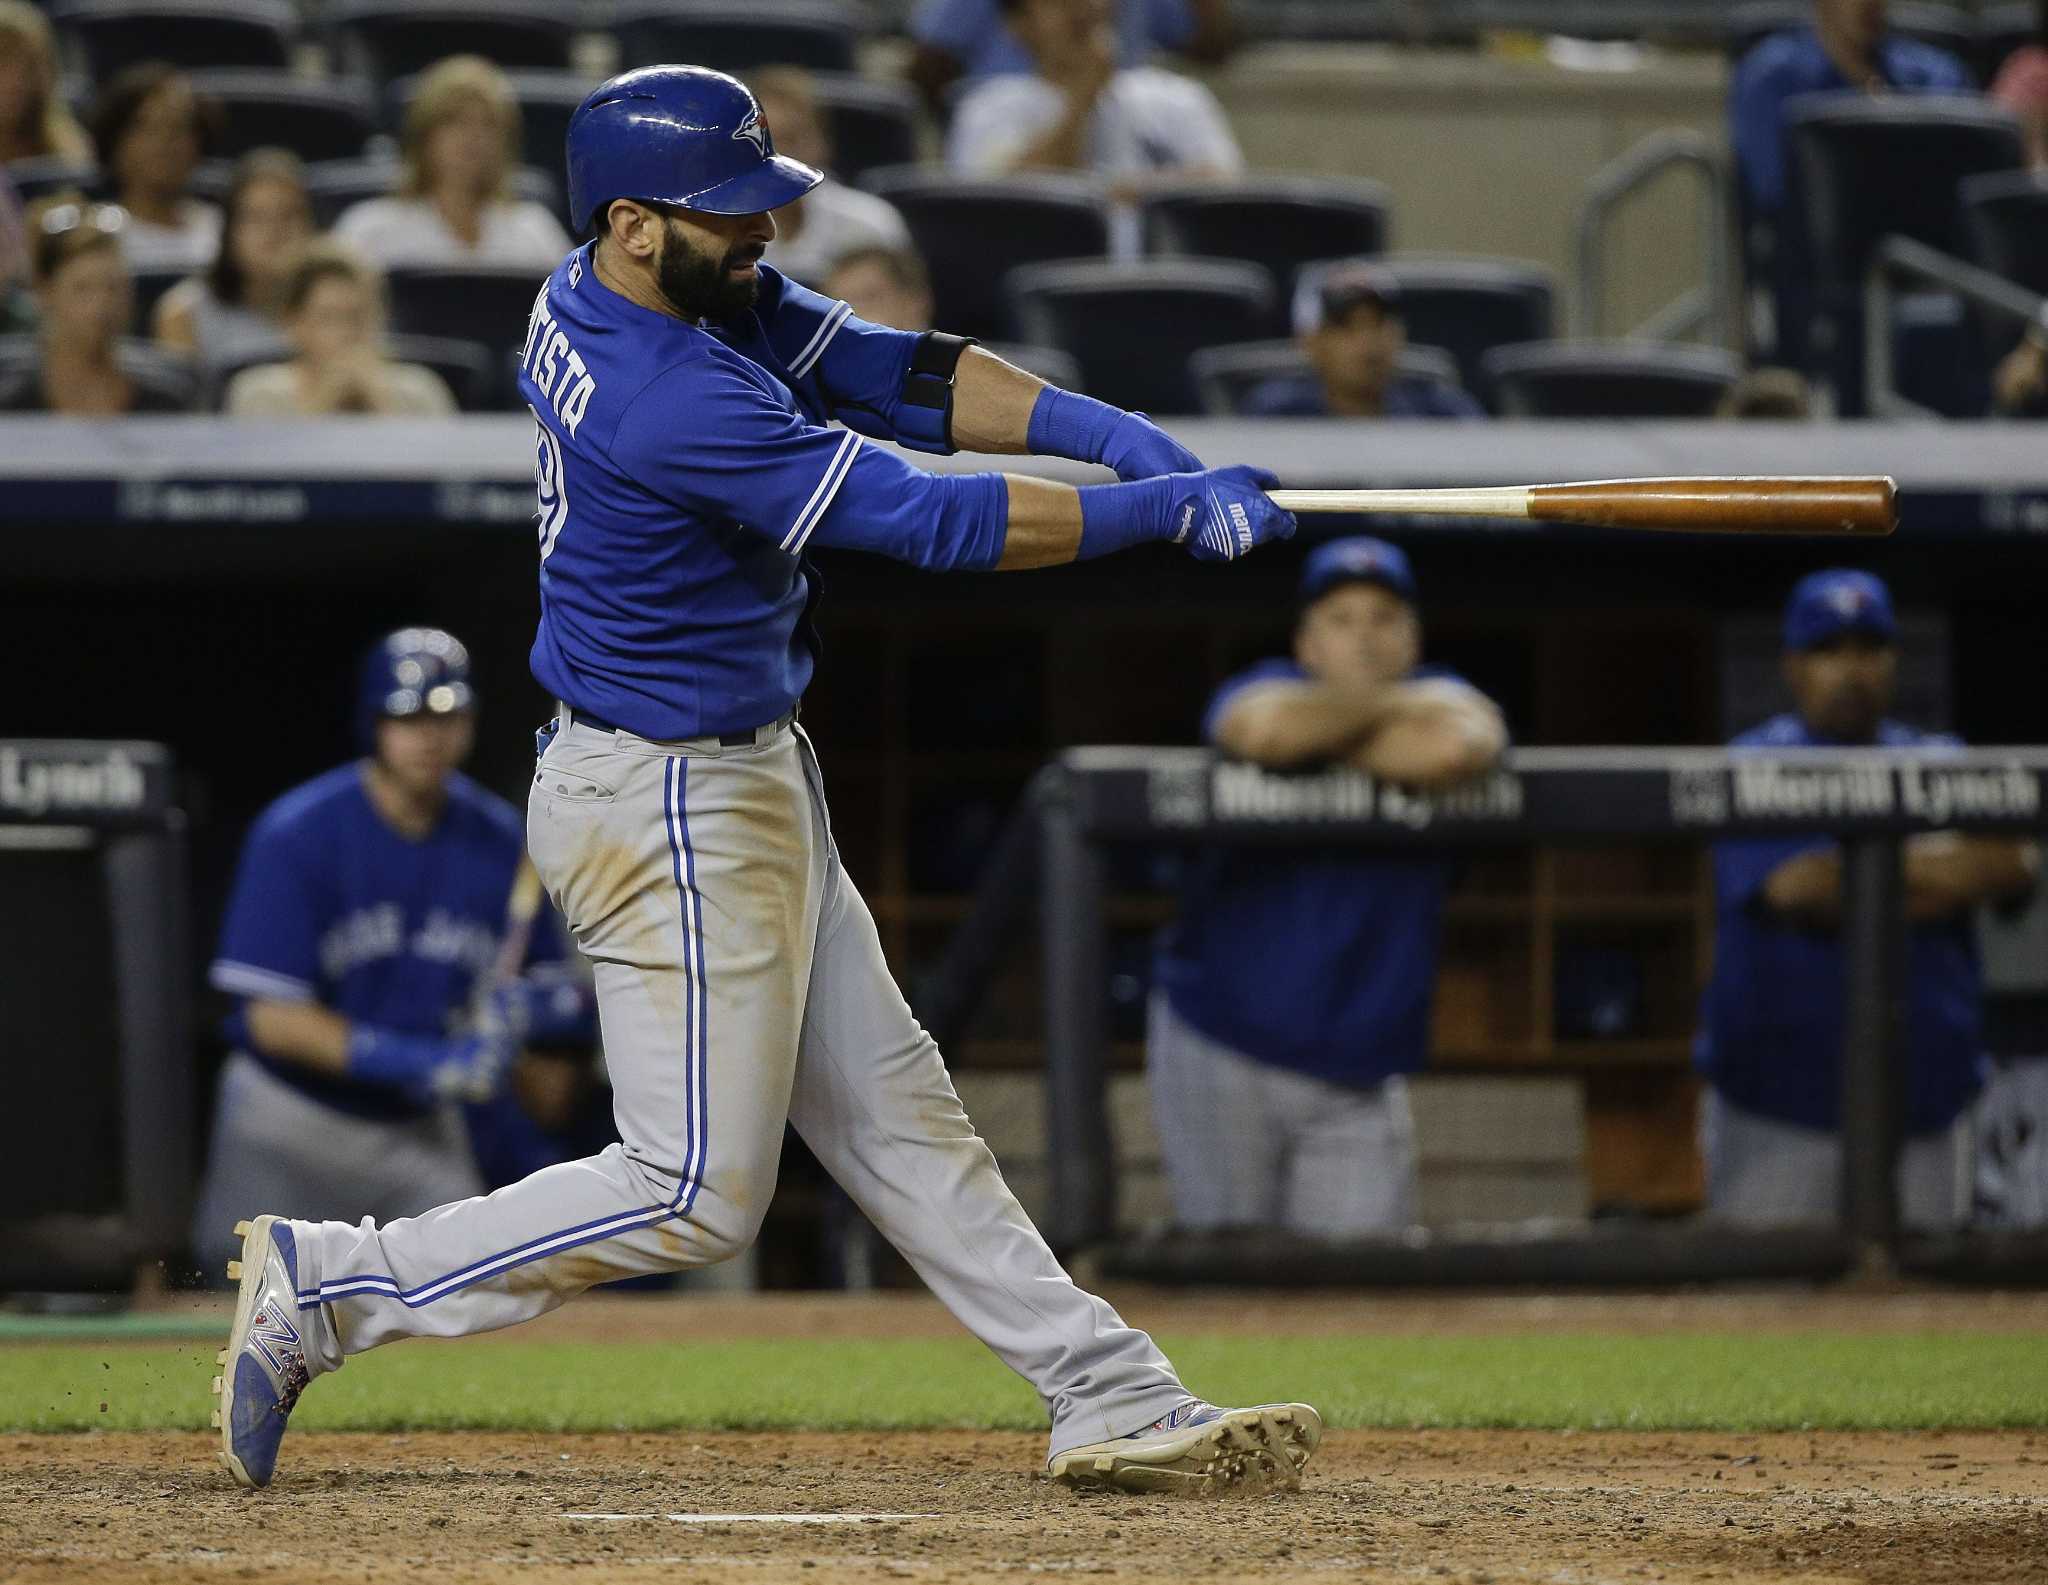 Jose Bautista homer in 10th lifts Blue Jays past Yankees